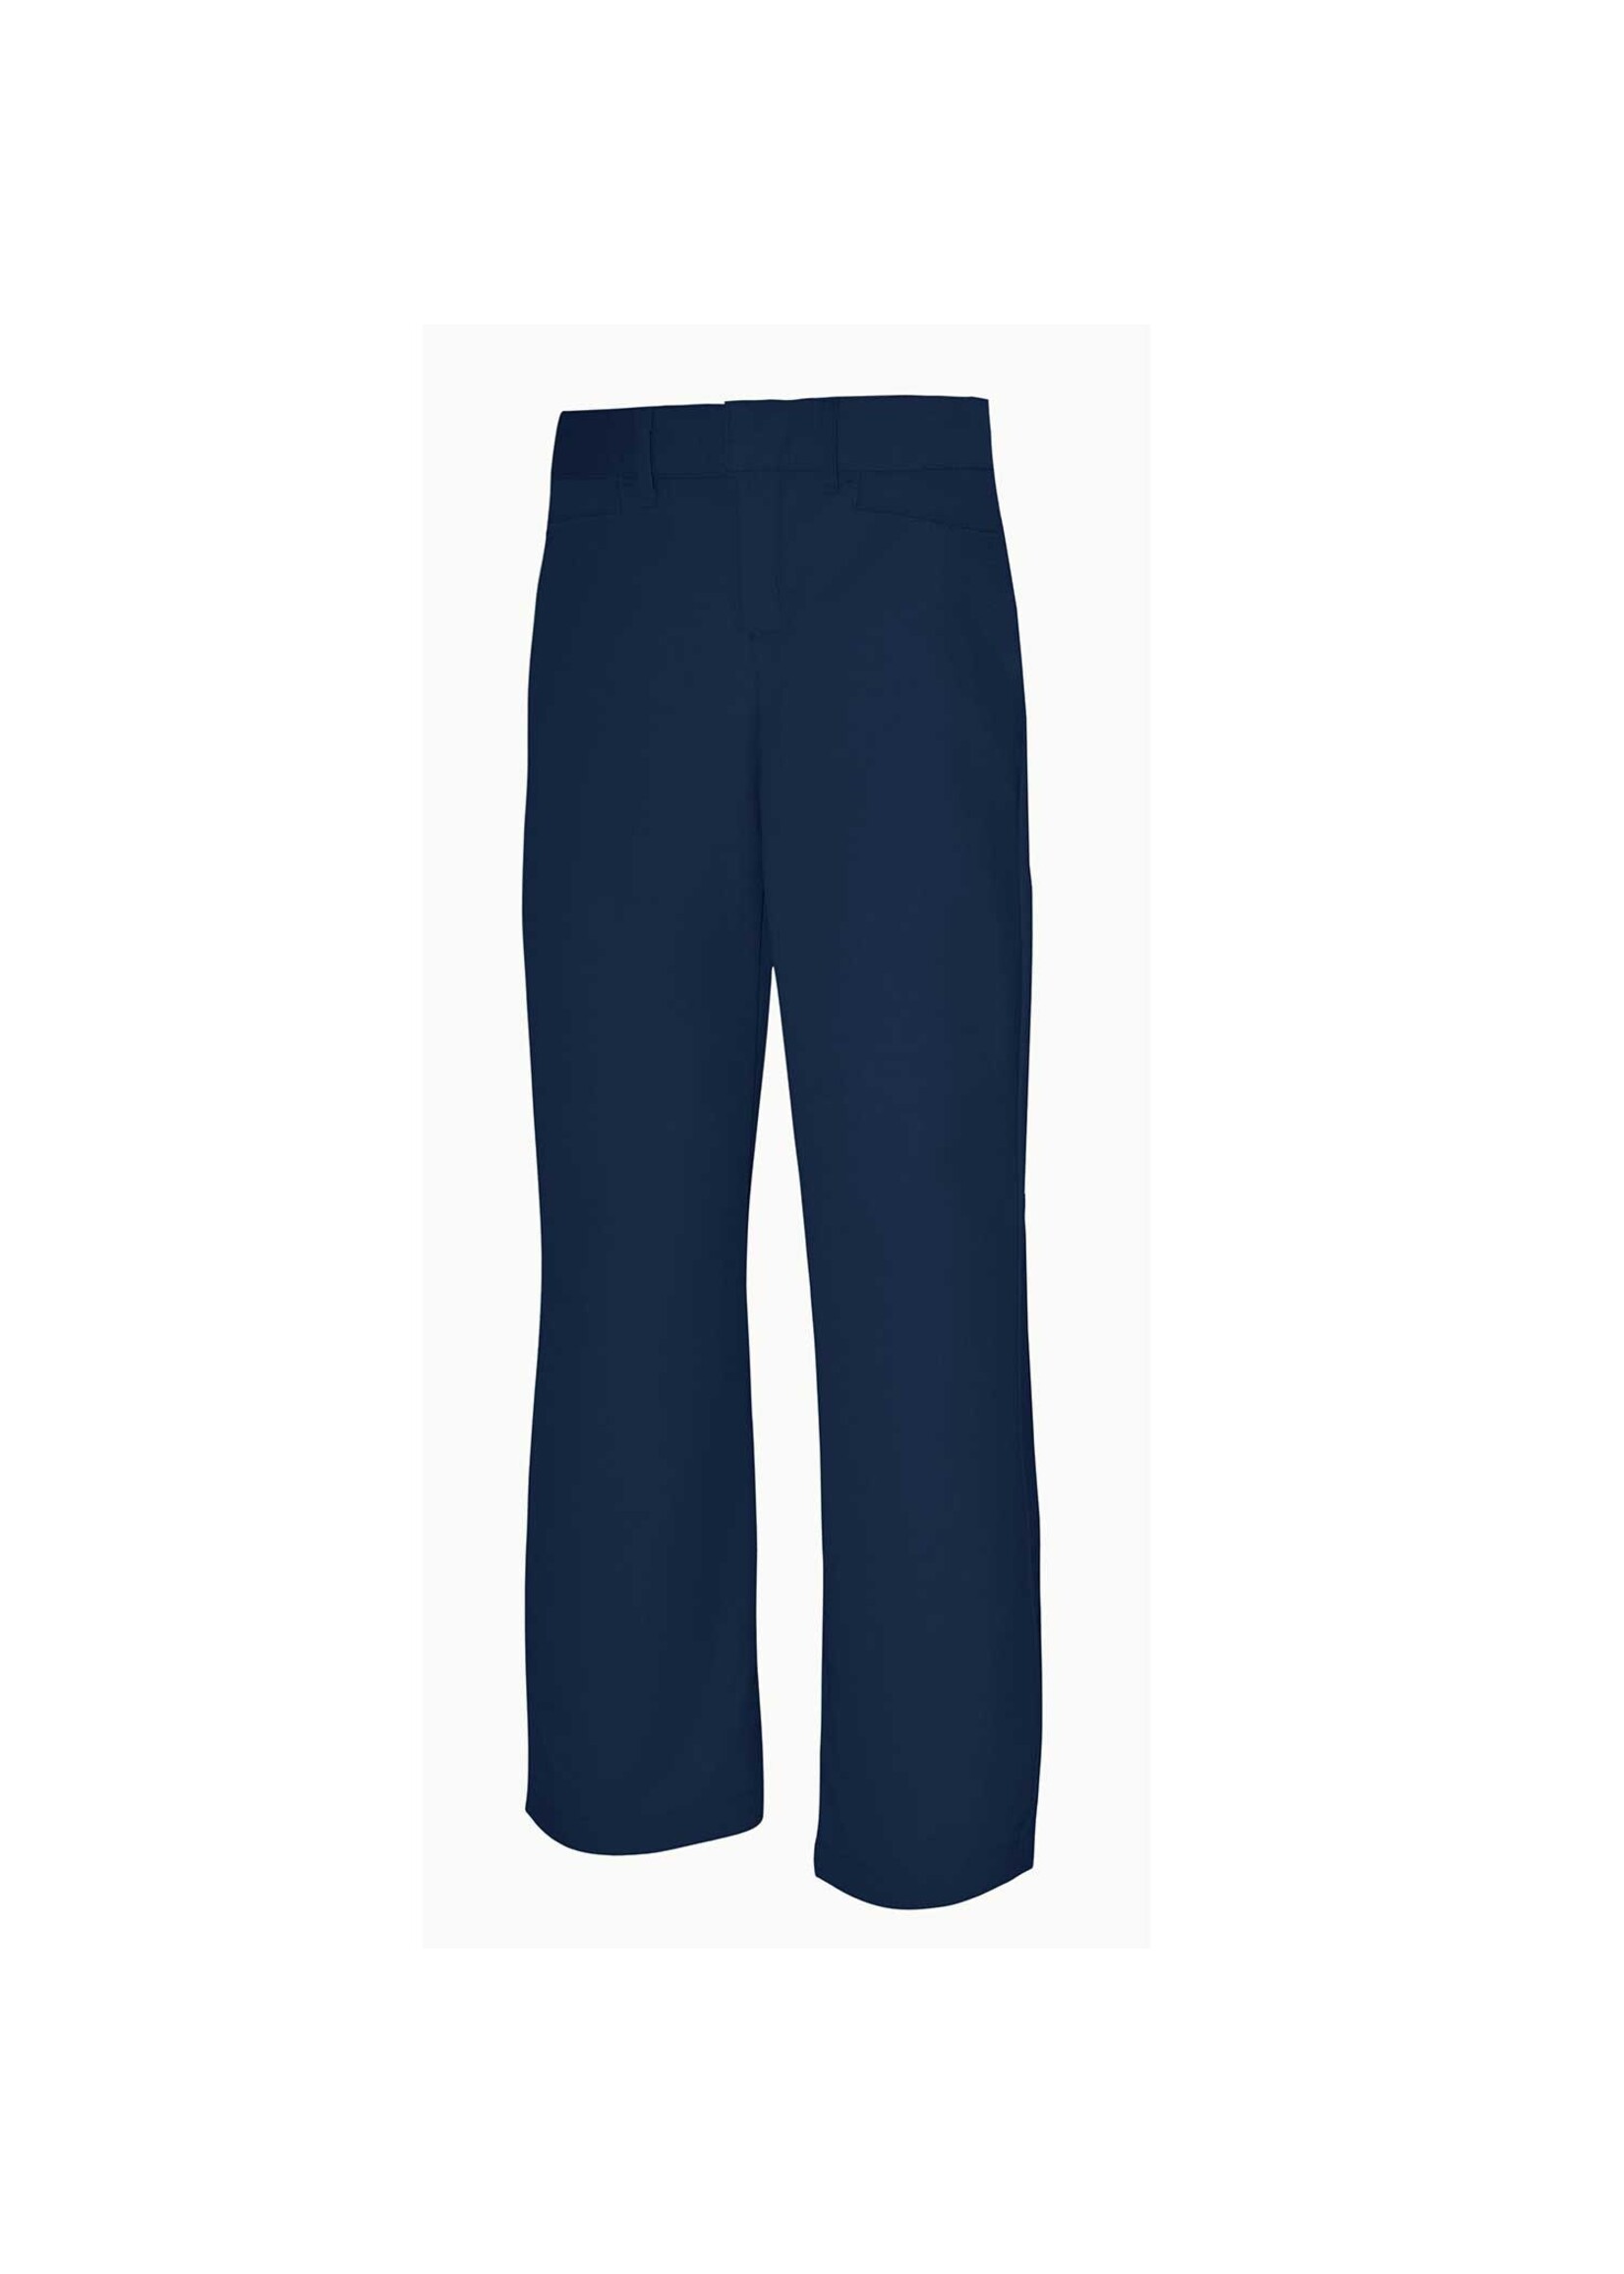 Girls Pants: Buy Girls Pants Online in India at Best Price [Latest 2022 Girls  Pants Design]